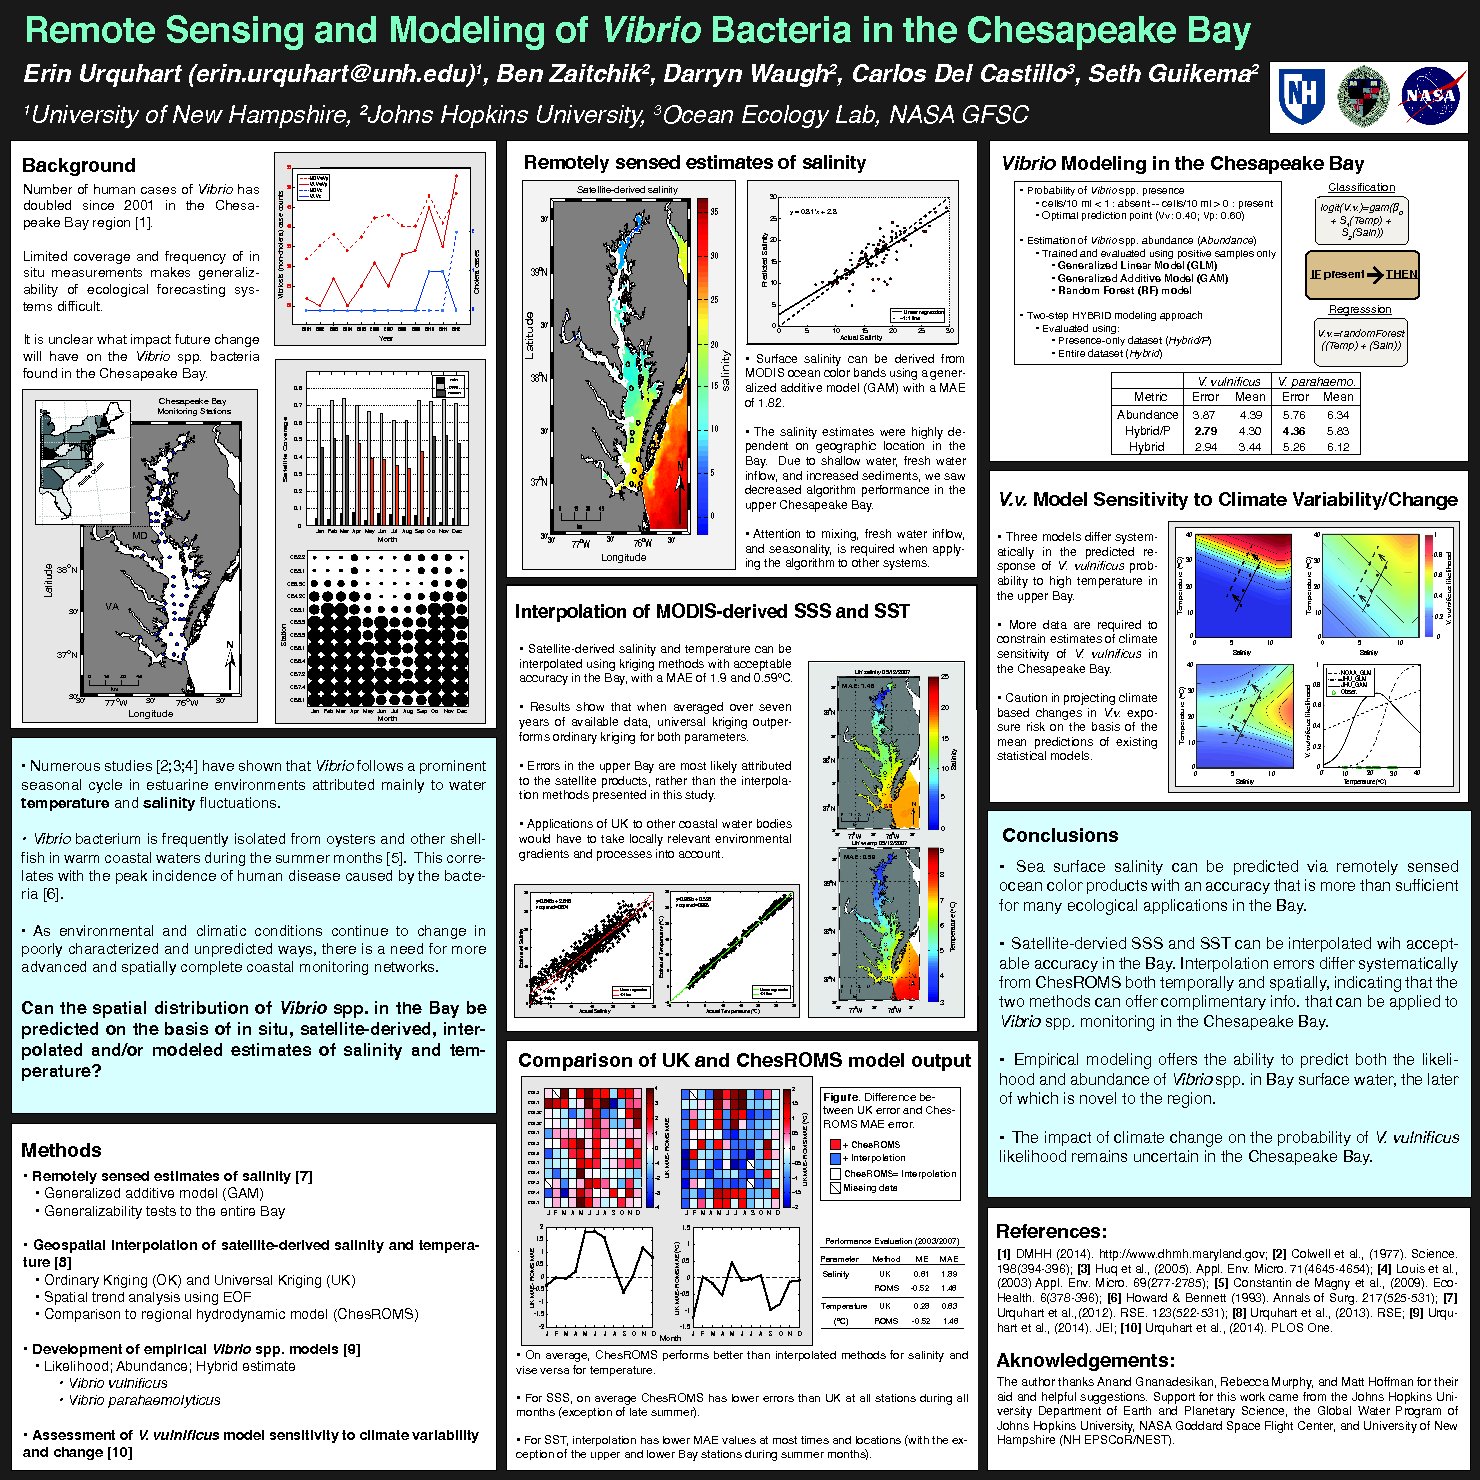 Remote Sensing And Modeling Of Vibrio Bacteria In The Chesapeake Bay by erinu